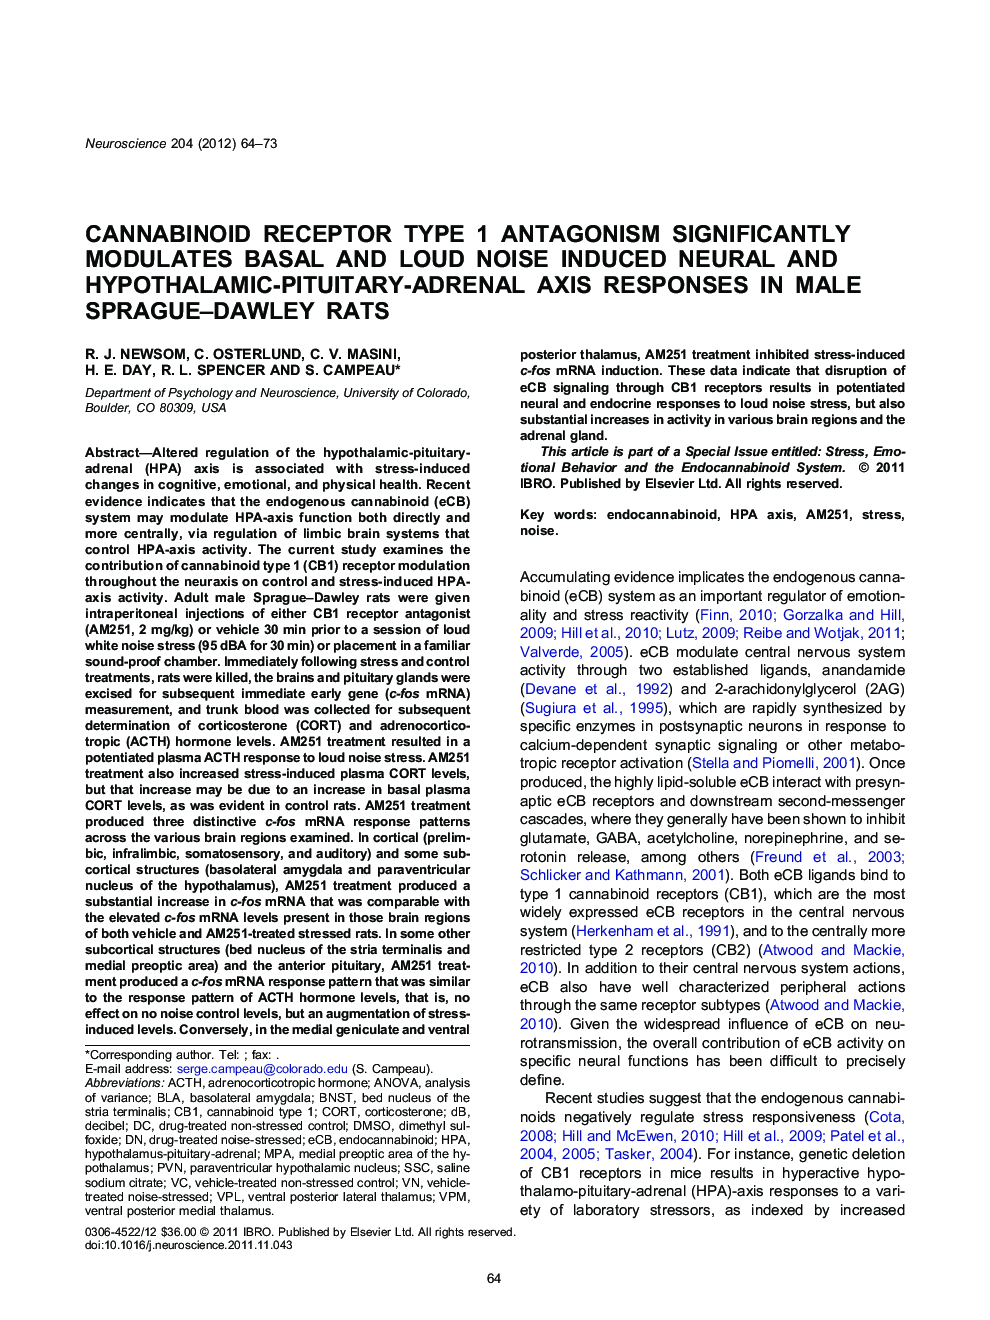 Cannabinoid receptor type 1 antagonism significantly modulates basal and loud noise induced neural and hypothalamic-pituitary-adrenal axis responses in male Sprague–Dawley rats